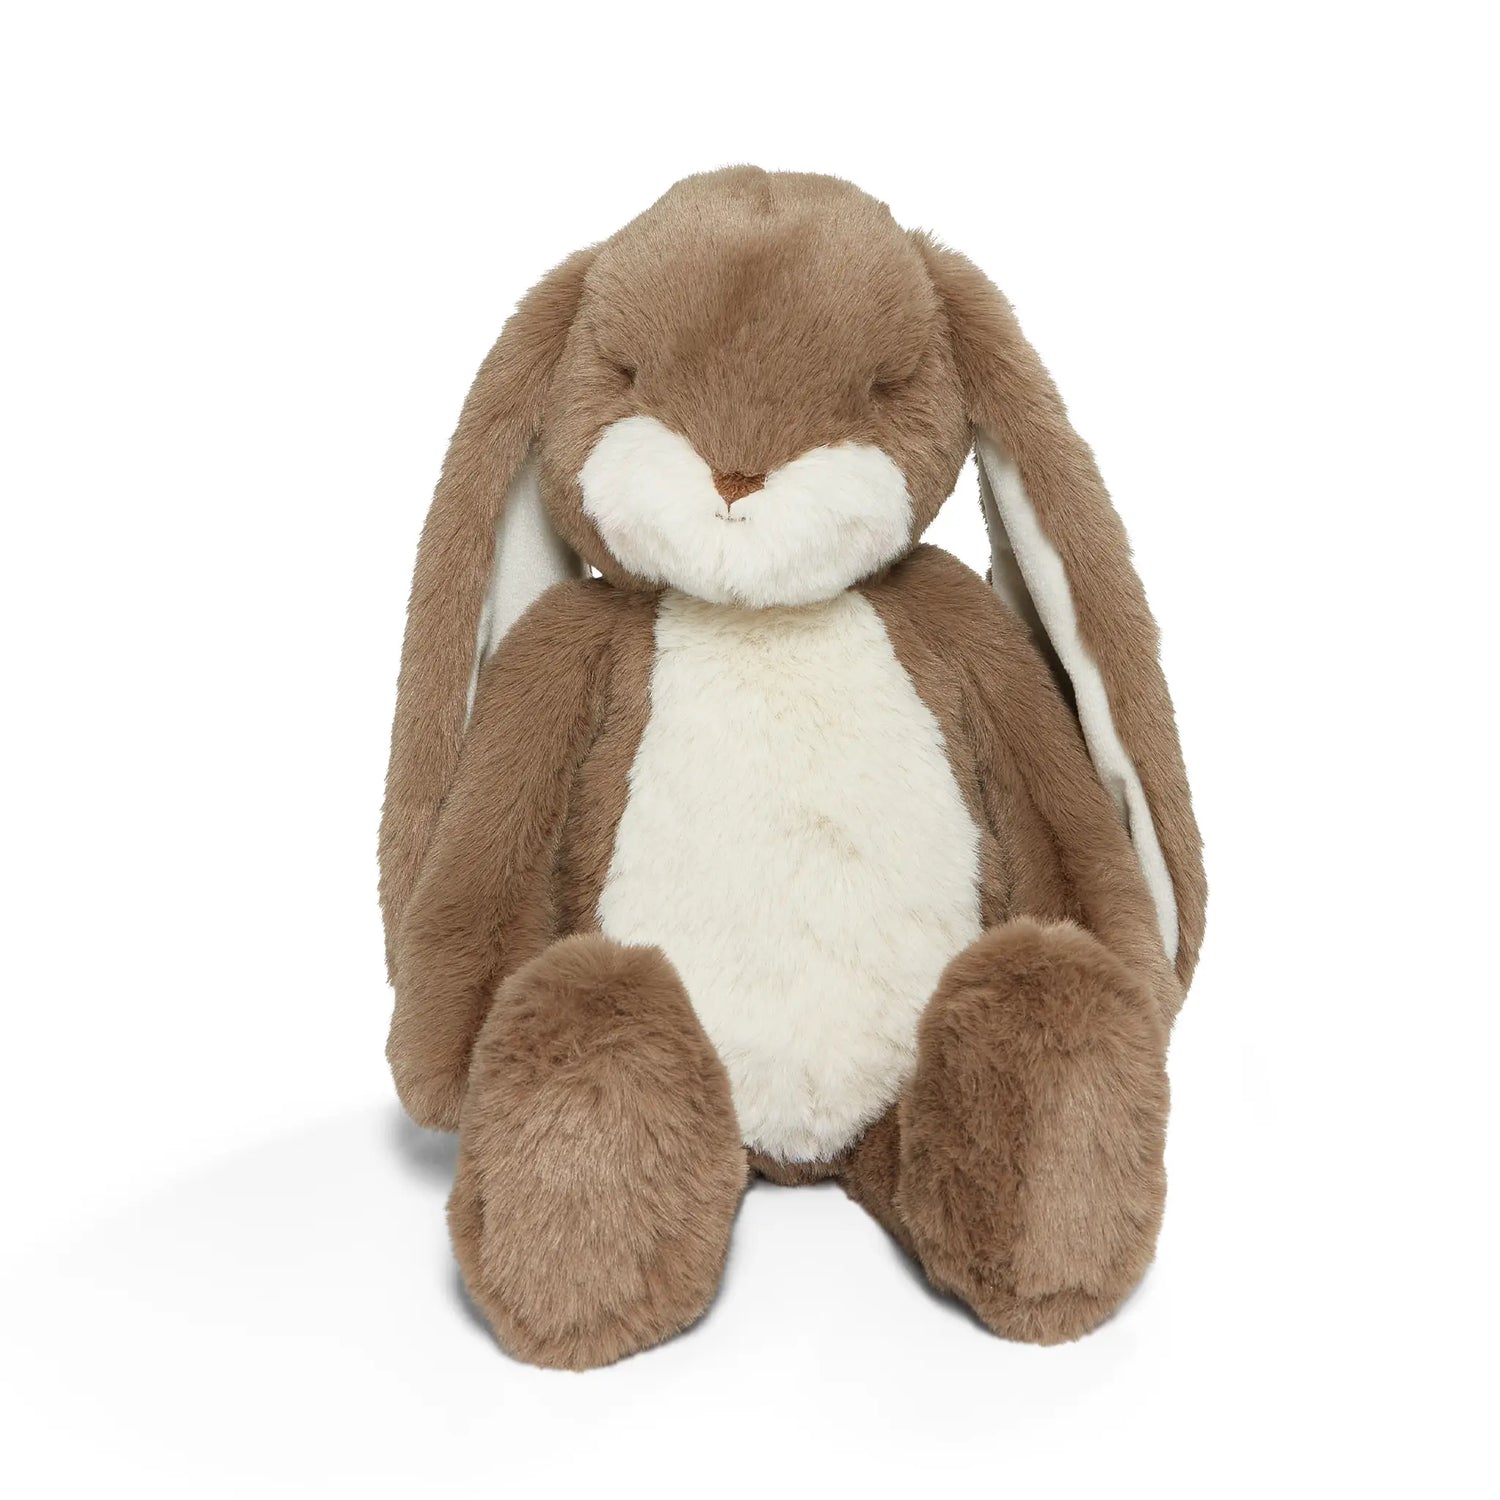 Little Nibble Floppy Bunny (Assorted Colors!) - Magpies Paducah